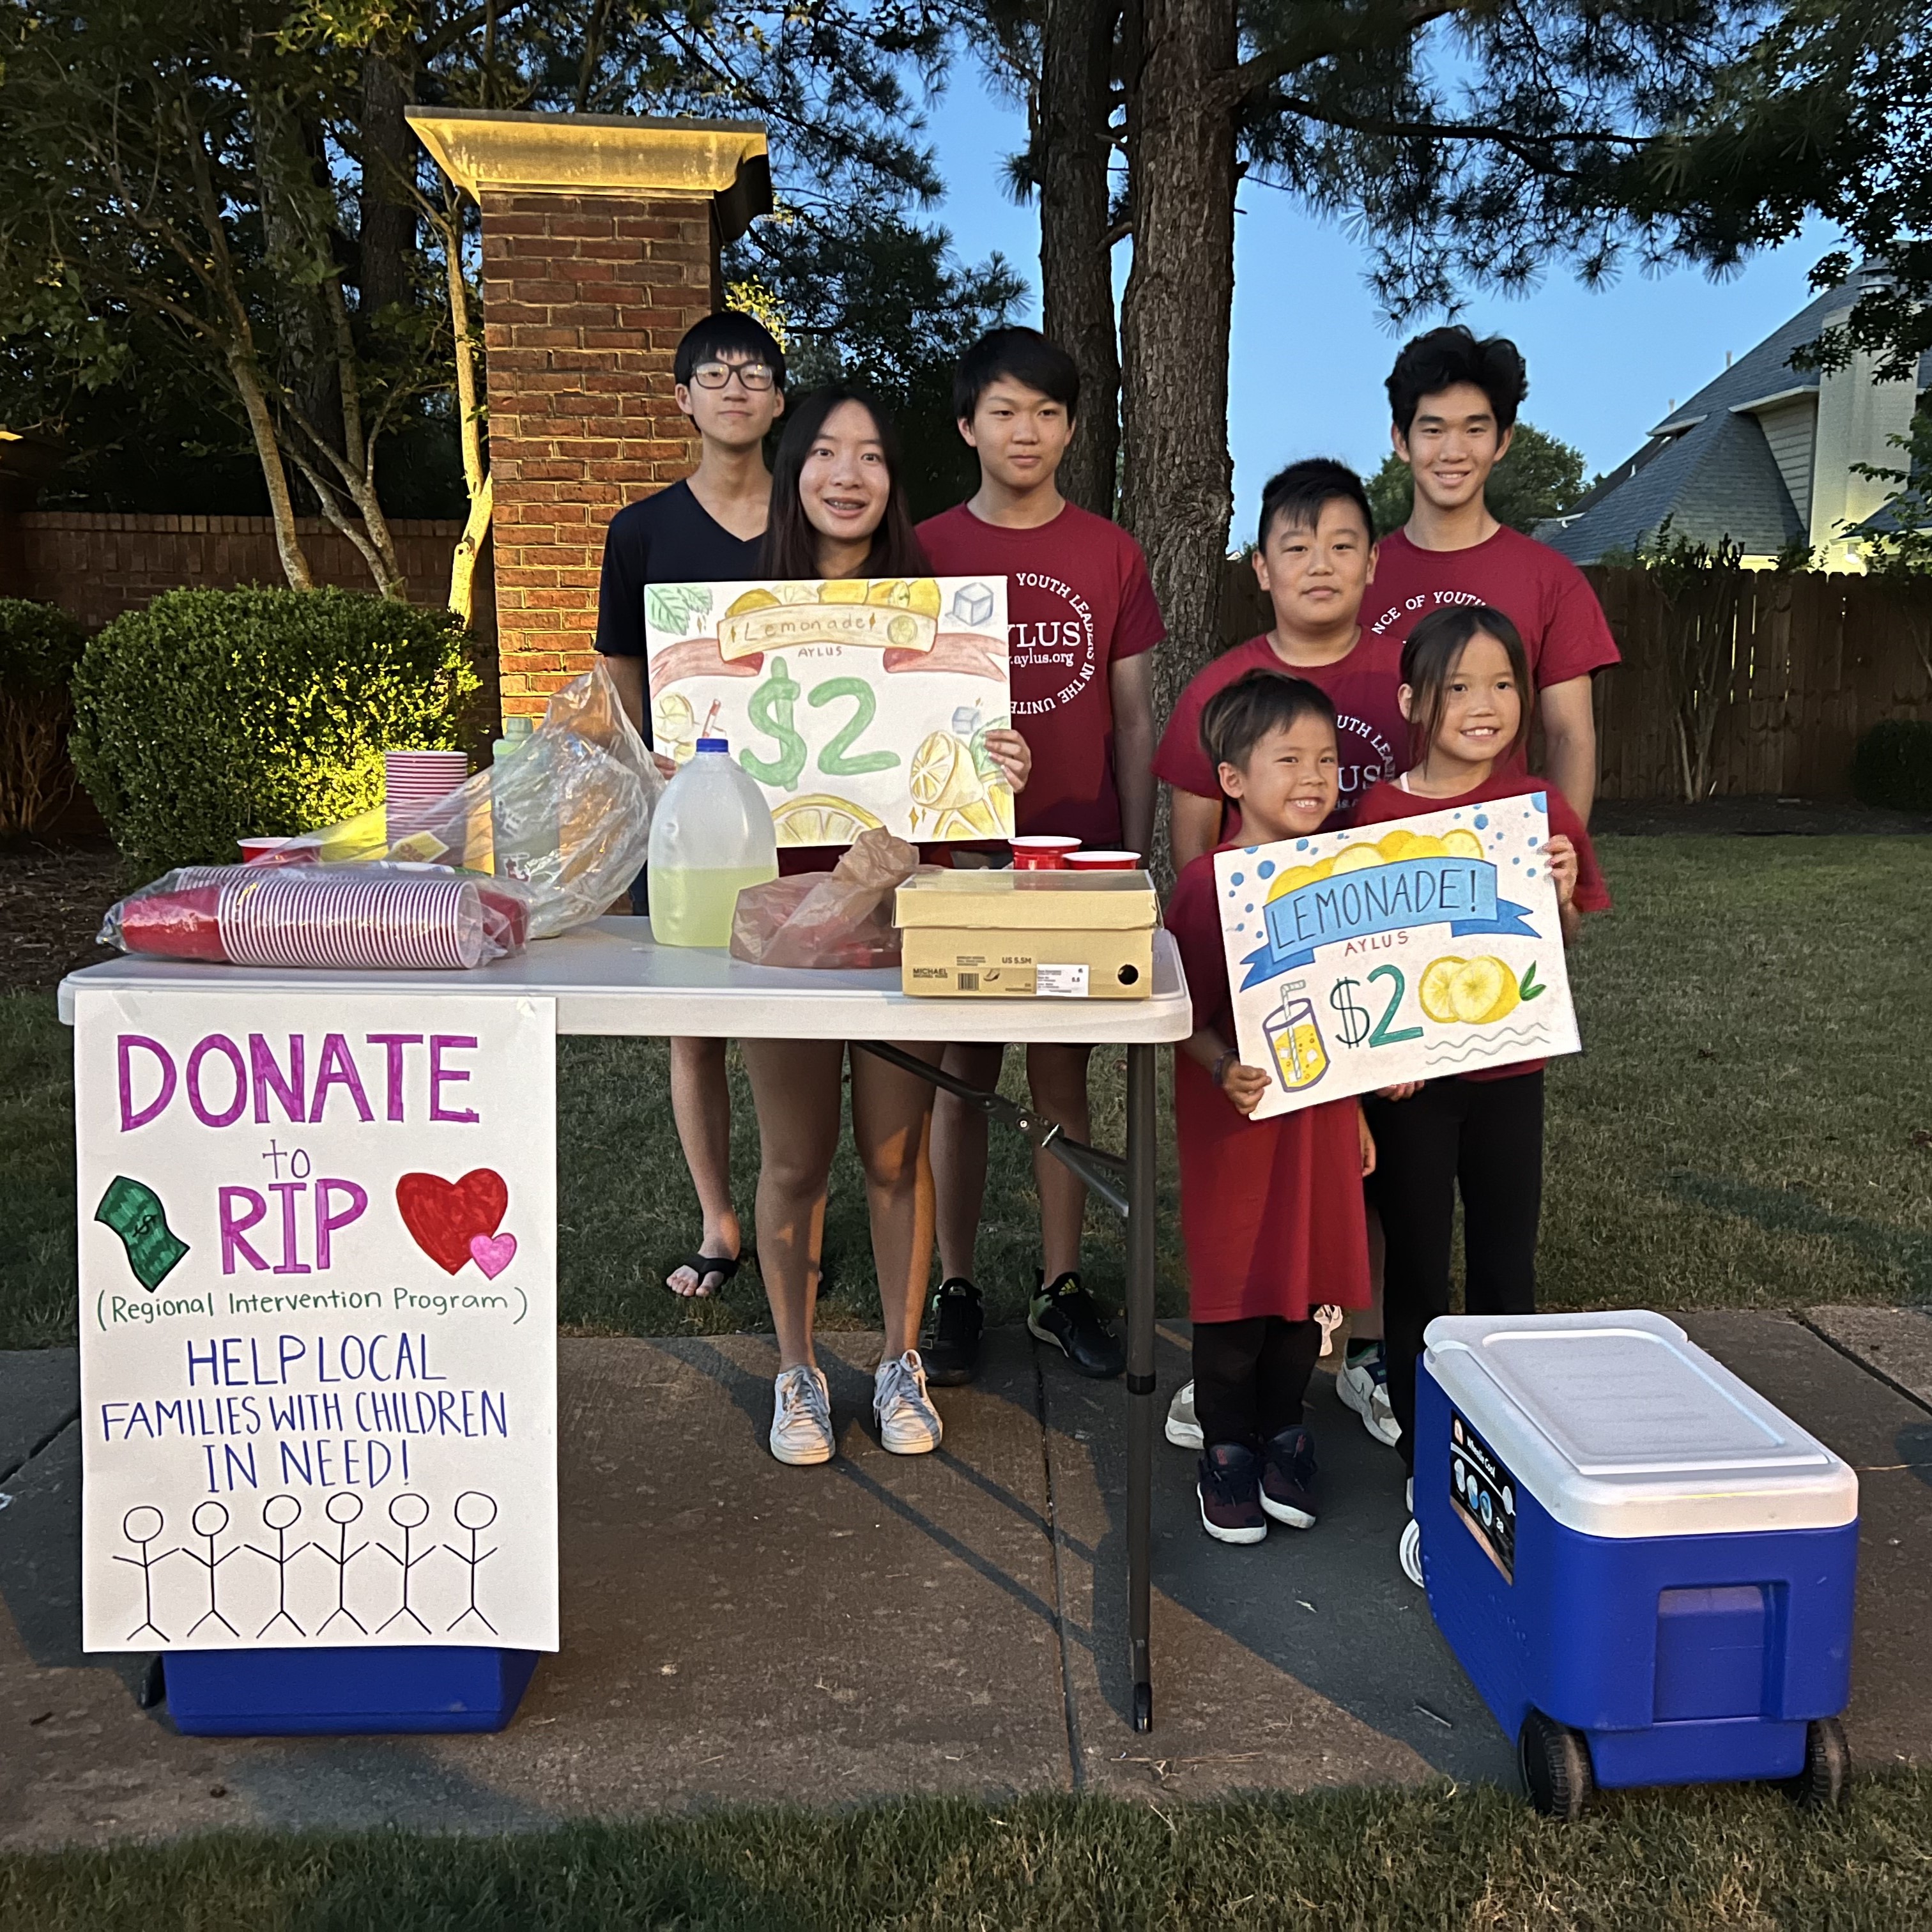 AYLUS Greater Memphis chapter fundraising with lemonade stand